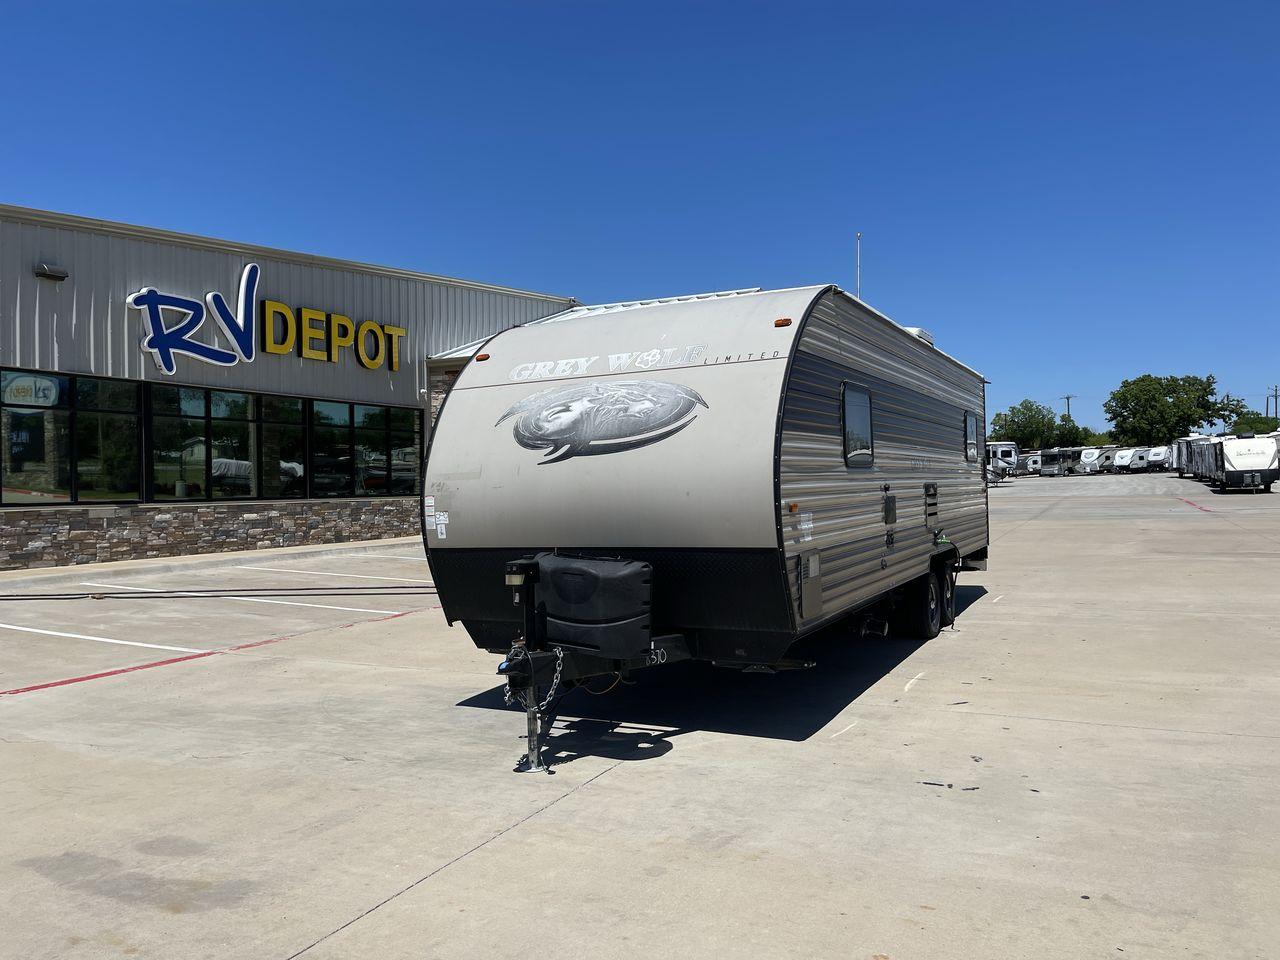 2018 FOREST RIVER GREY WOLF 22RR (4X4TCKX2XJK) , Length: 28.83 ft. ft | Dry Weight: 4,871 lbs | Gross Weight: 7,686 lbs.| Slides: 0 transmission, located at 4319 N Main Street, Cleburne, TX, 76033, (817) 221-0660, 32.435829, -97.384178 - Introducing the 2018 Forest River Grey Wolf 22RR, a flexible and well-designed travel trailer ideal for explorers who want both comfort and functionality on the road. With a length of 28.83 feet and a dry weight of 4,871 pounds, this RV maintains a balance between spaciousness and lightweight towing - Photo #0